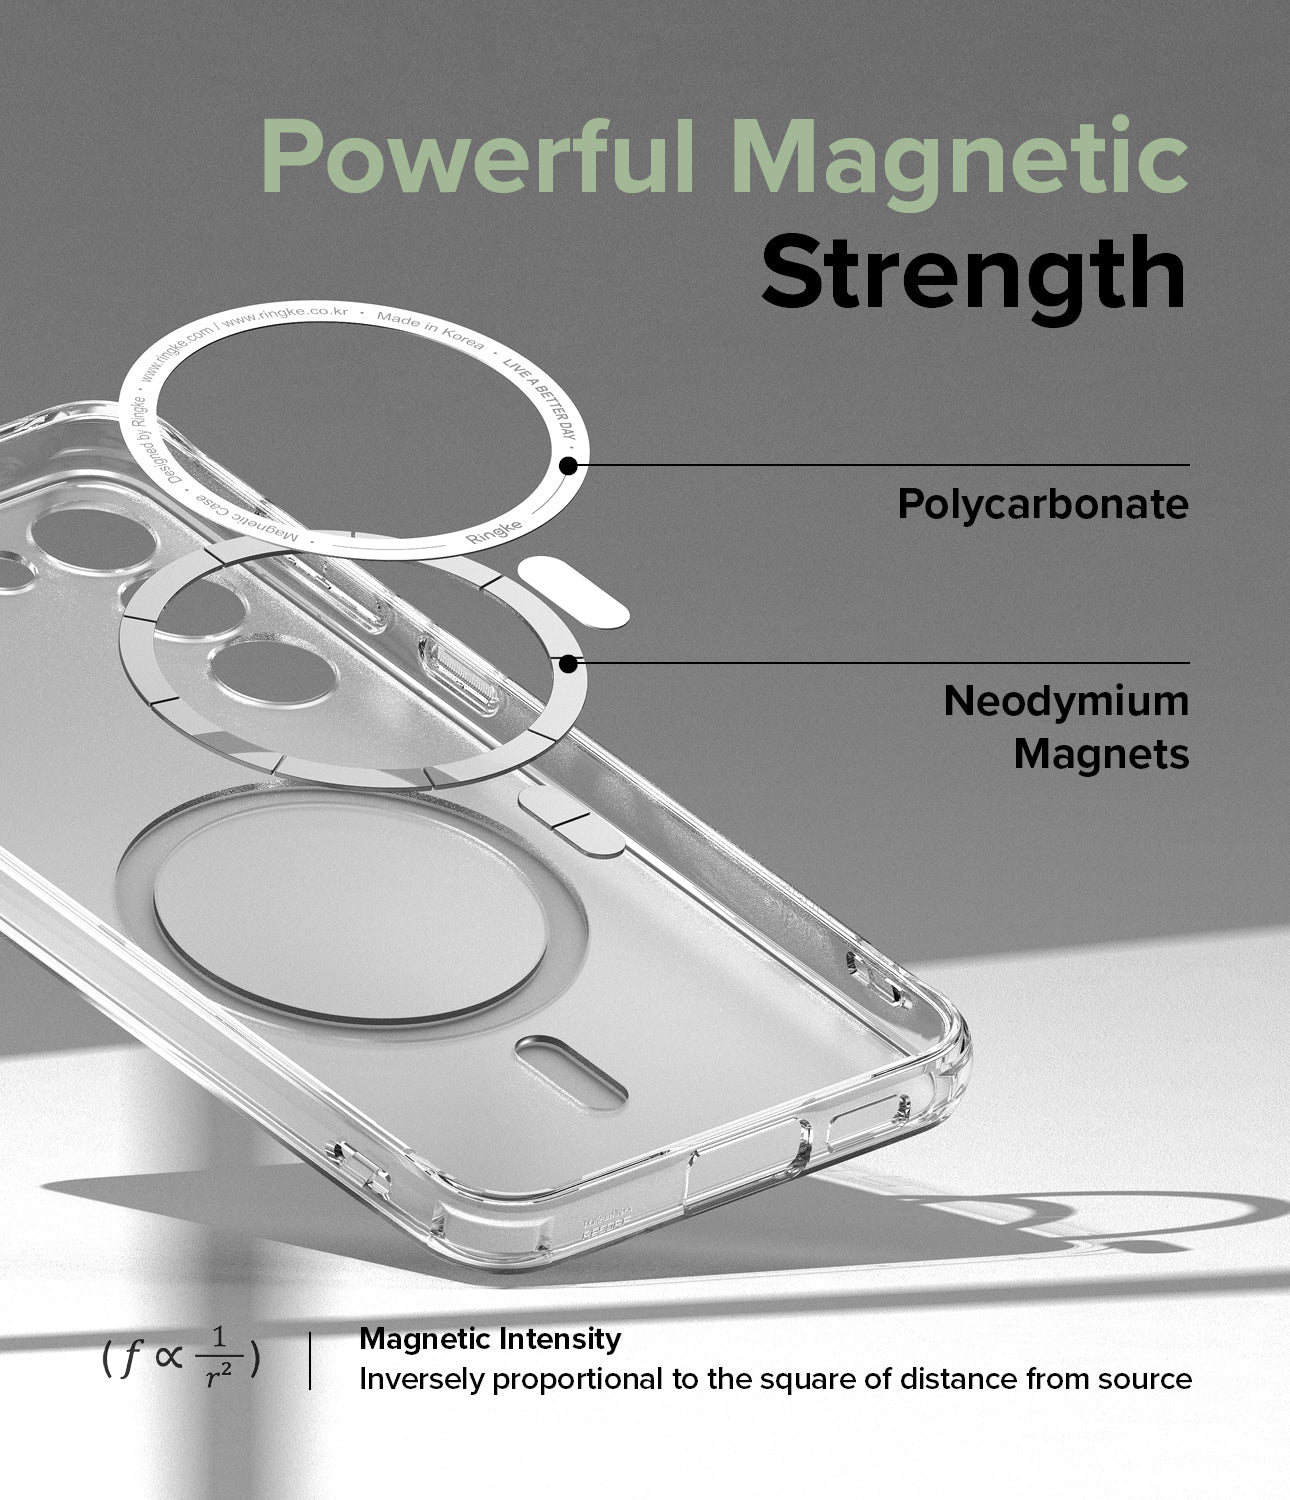 Powerful Magnetic Strength l Polycarbonate / Neodymium Magnets. Magnetic Intensity - Inversely proportional to the square of distance from source